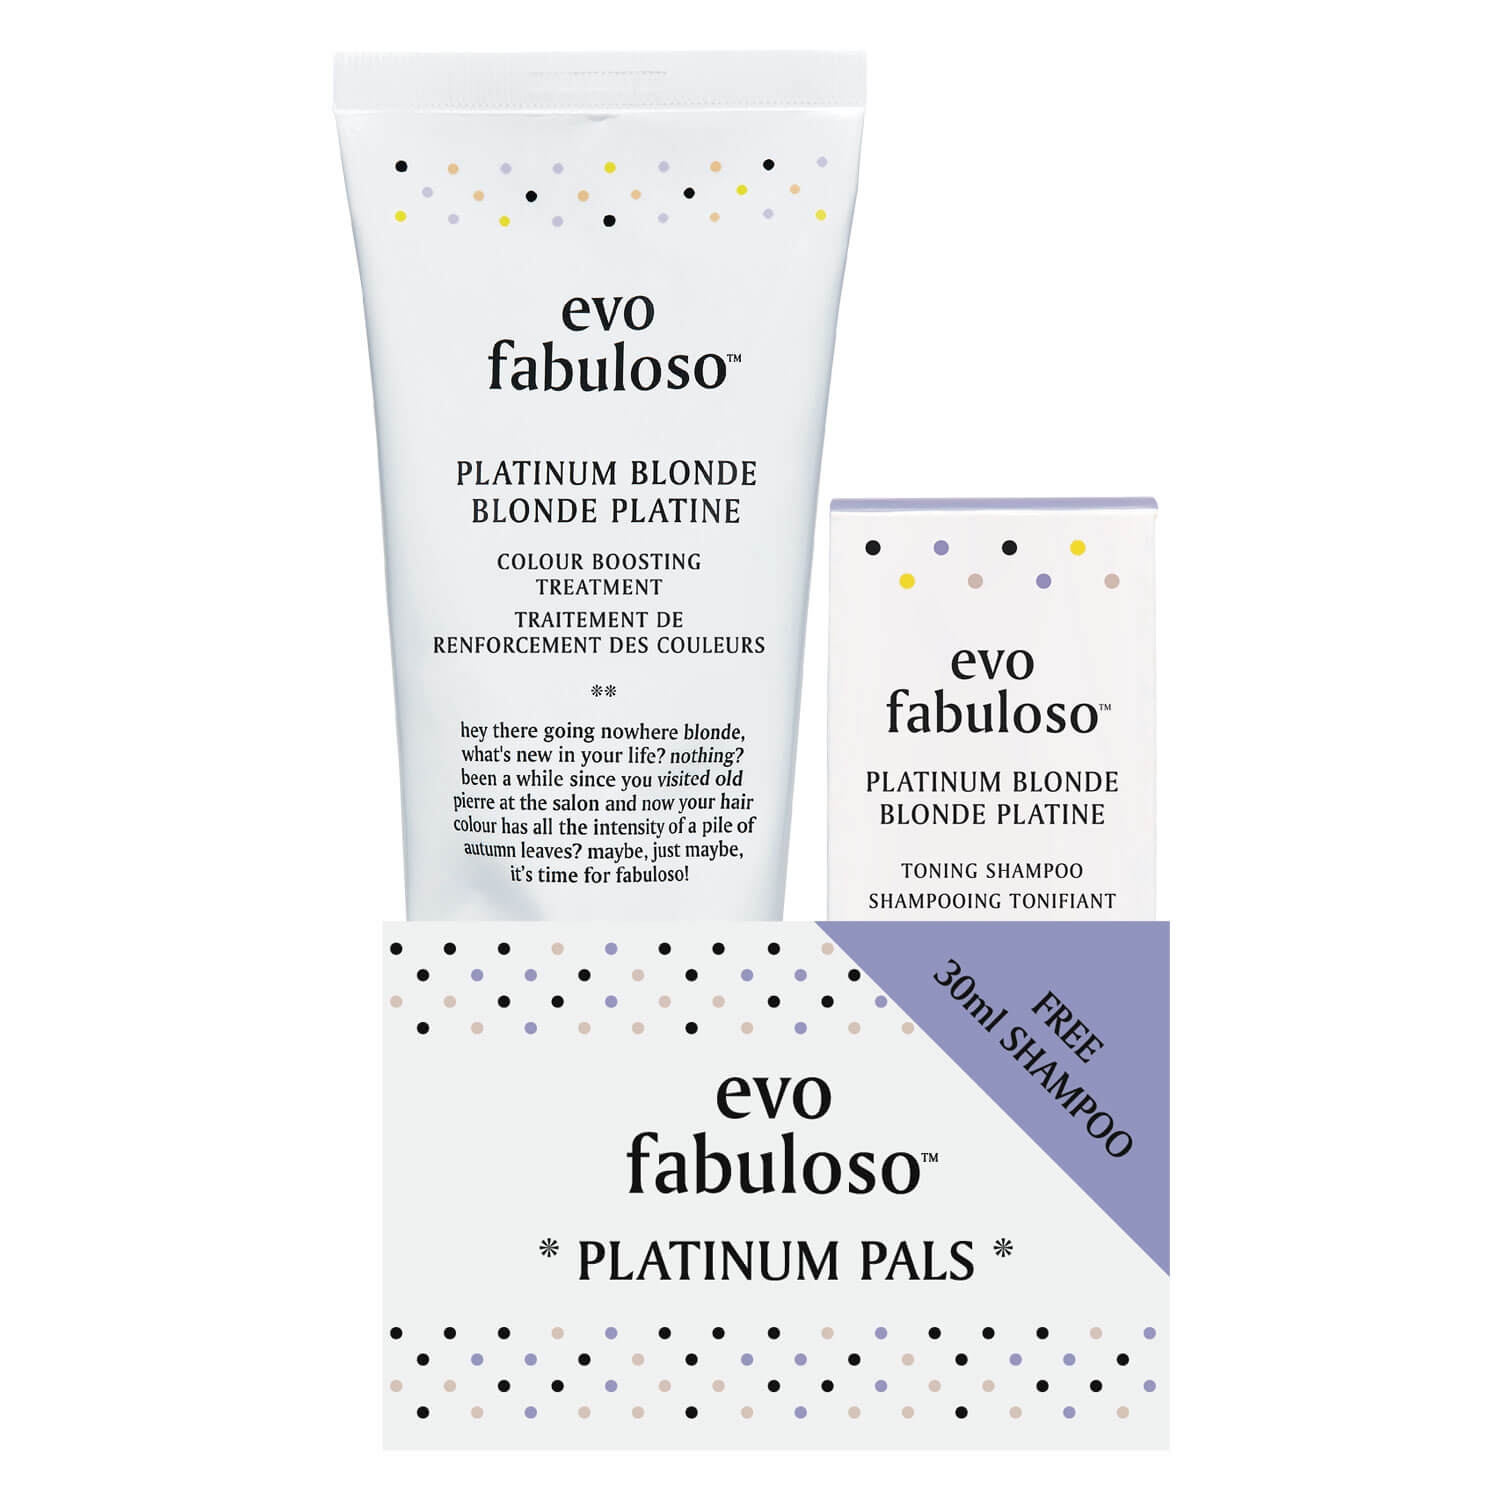 Product image from evo Fabuloso - Platinum Pals